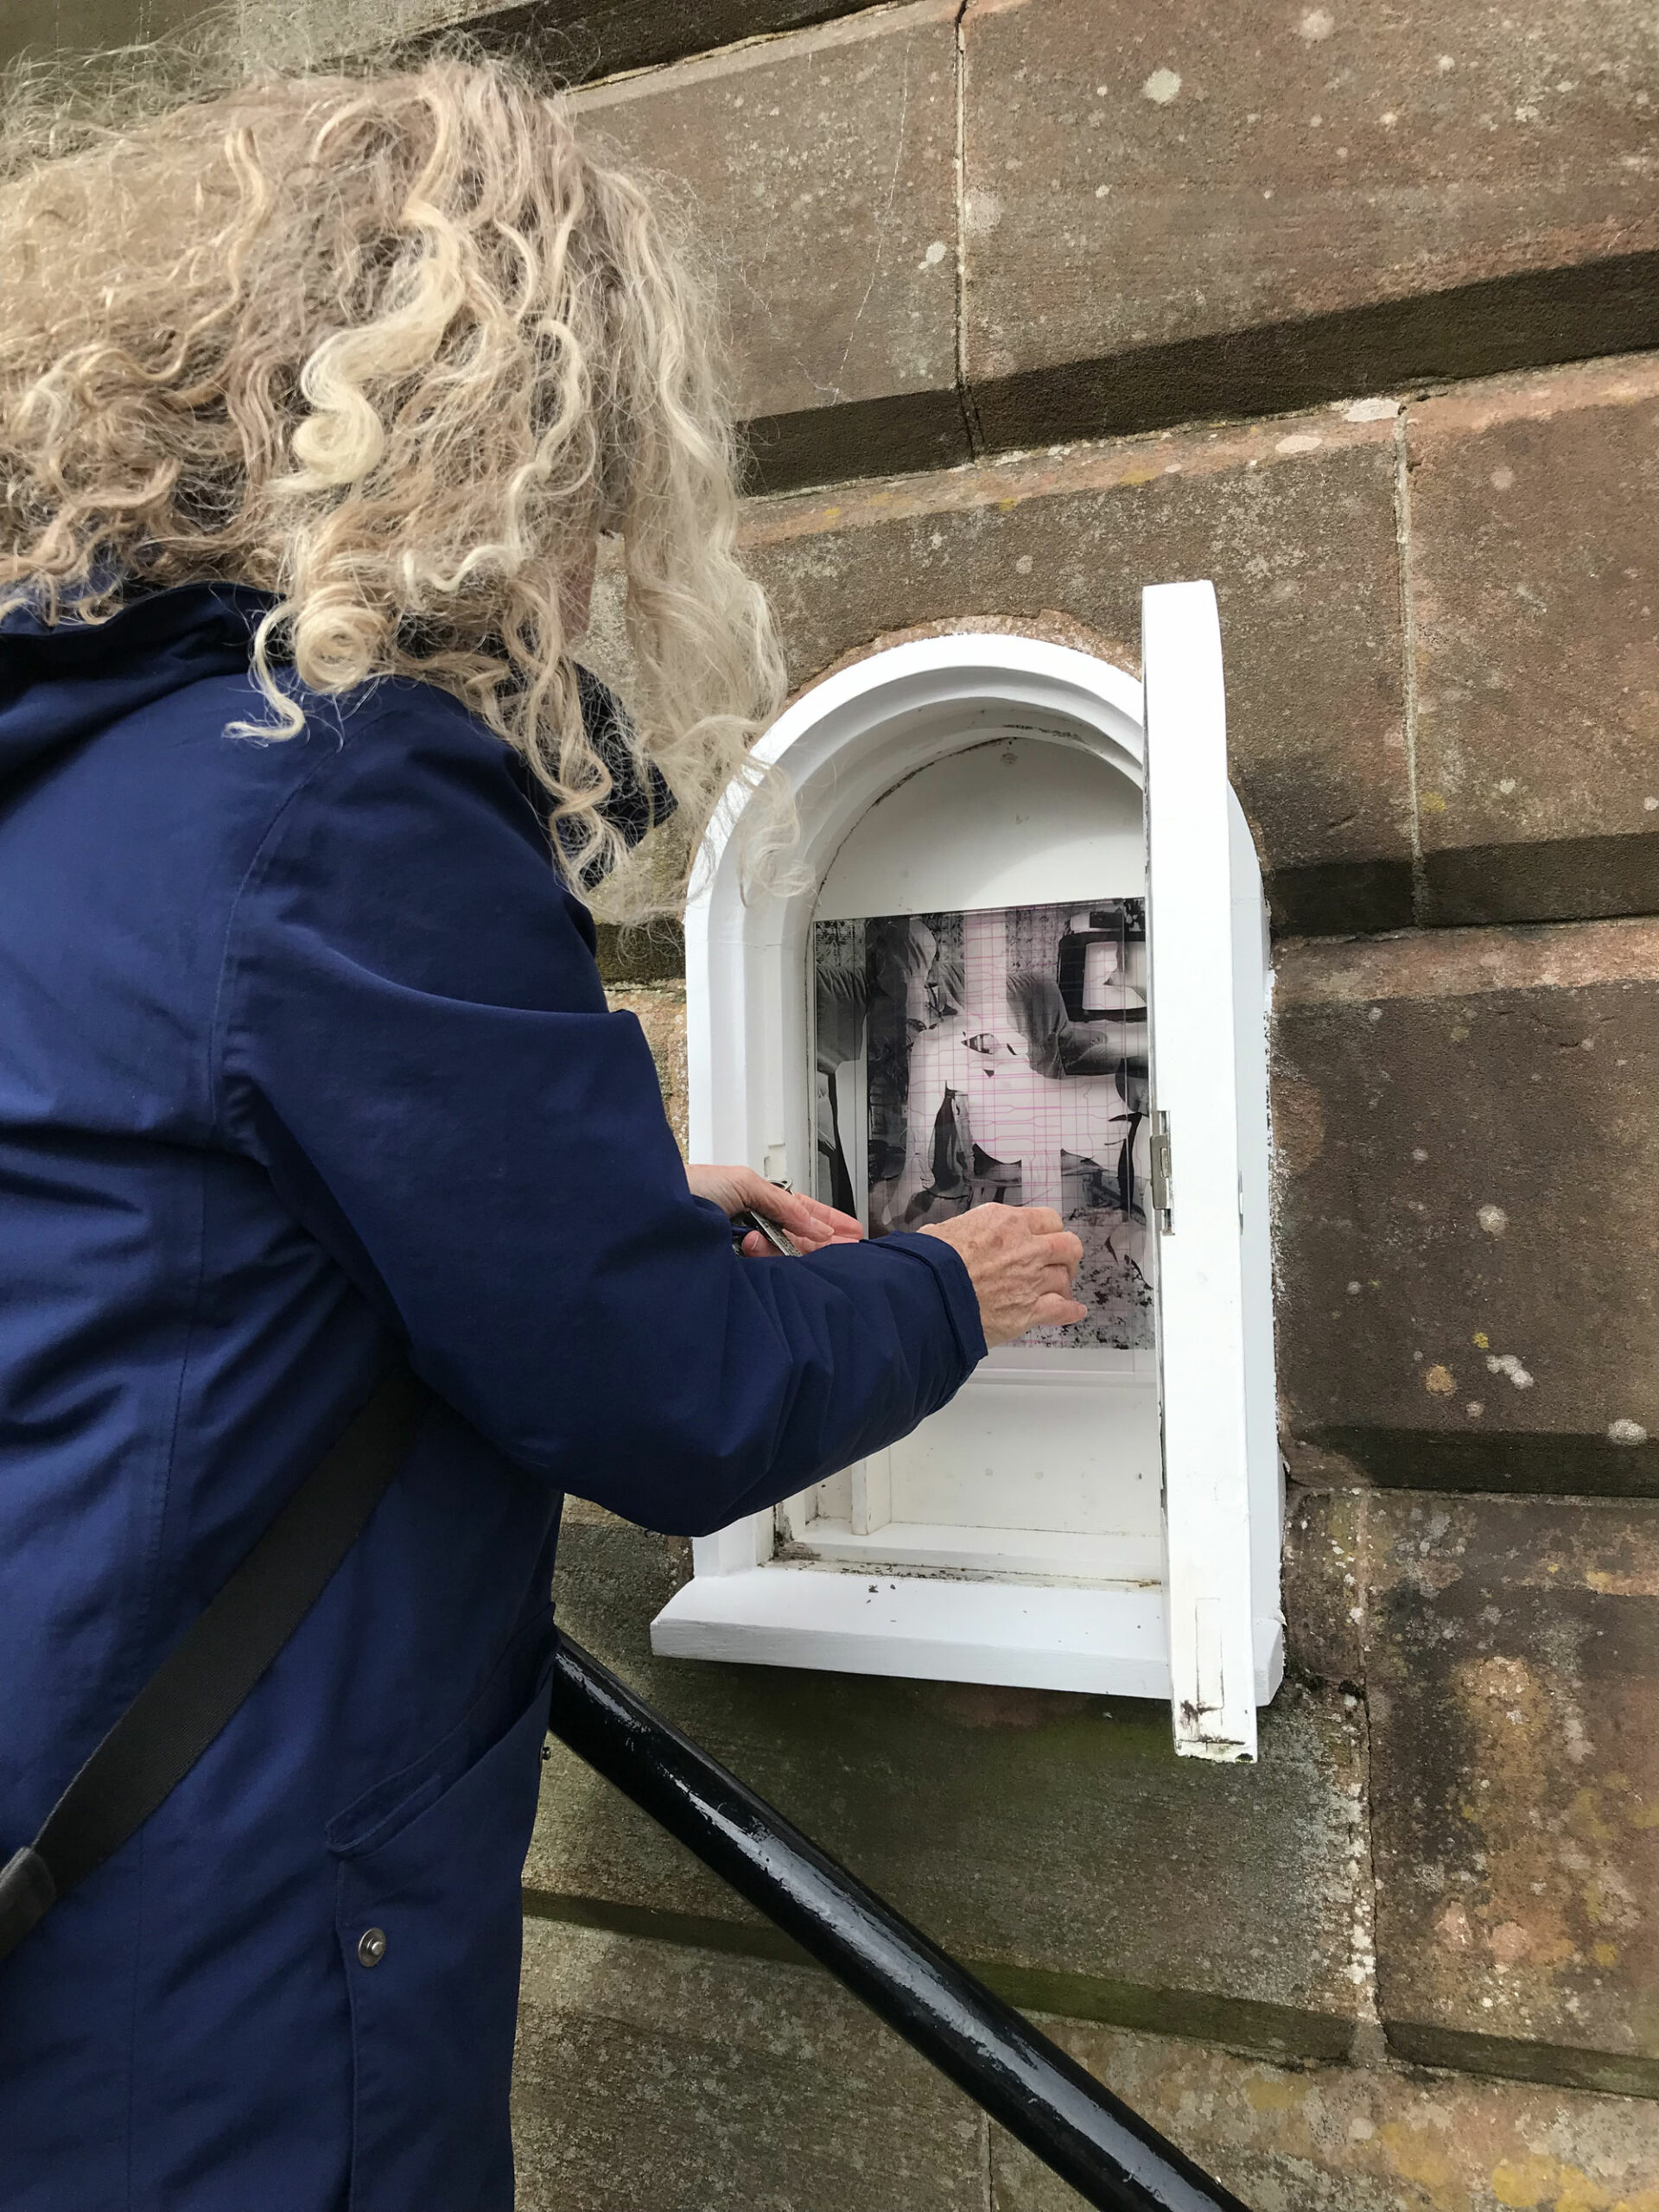 The artist installing artwork in small niche at Midsteeple, Dumfries